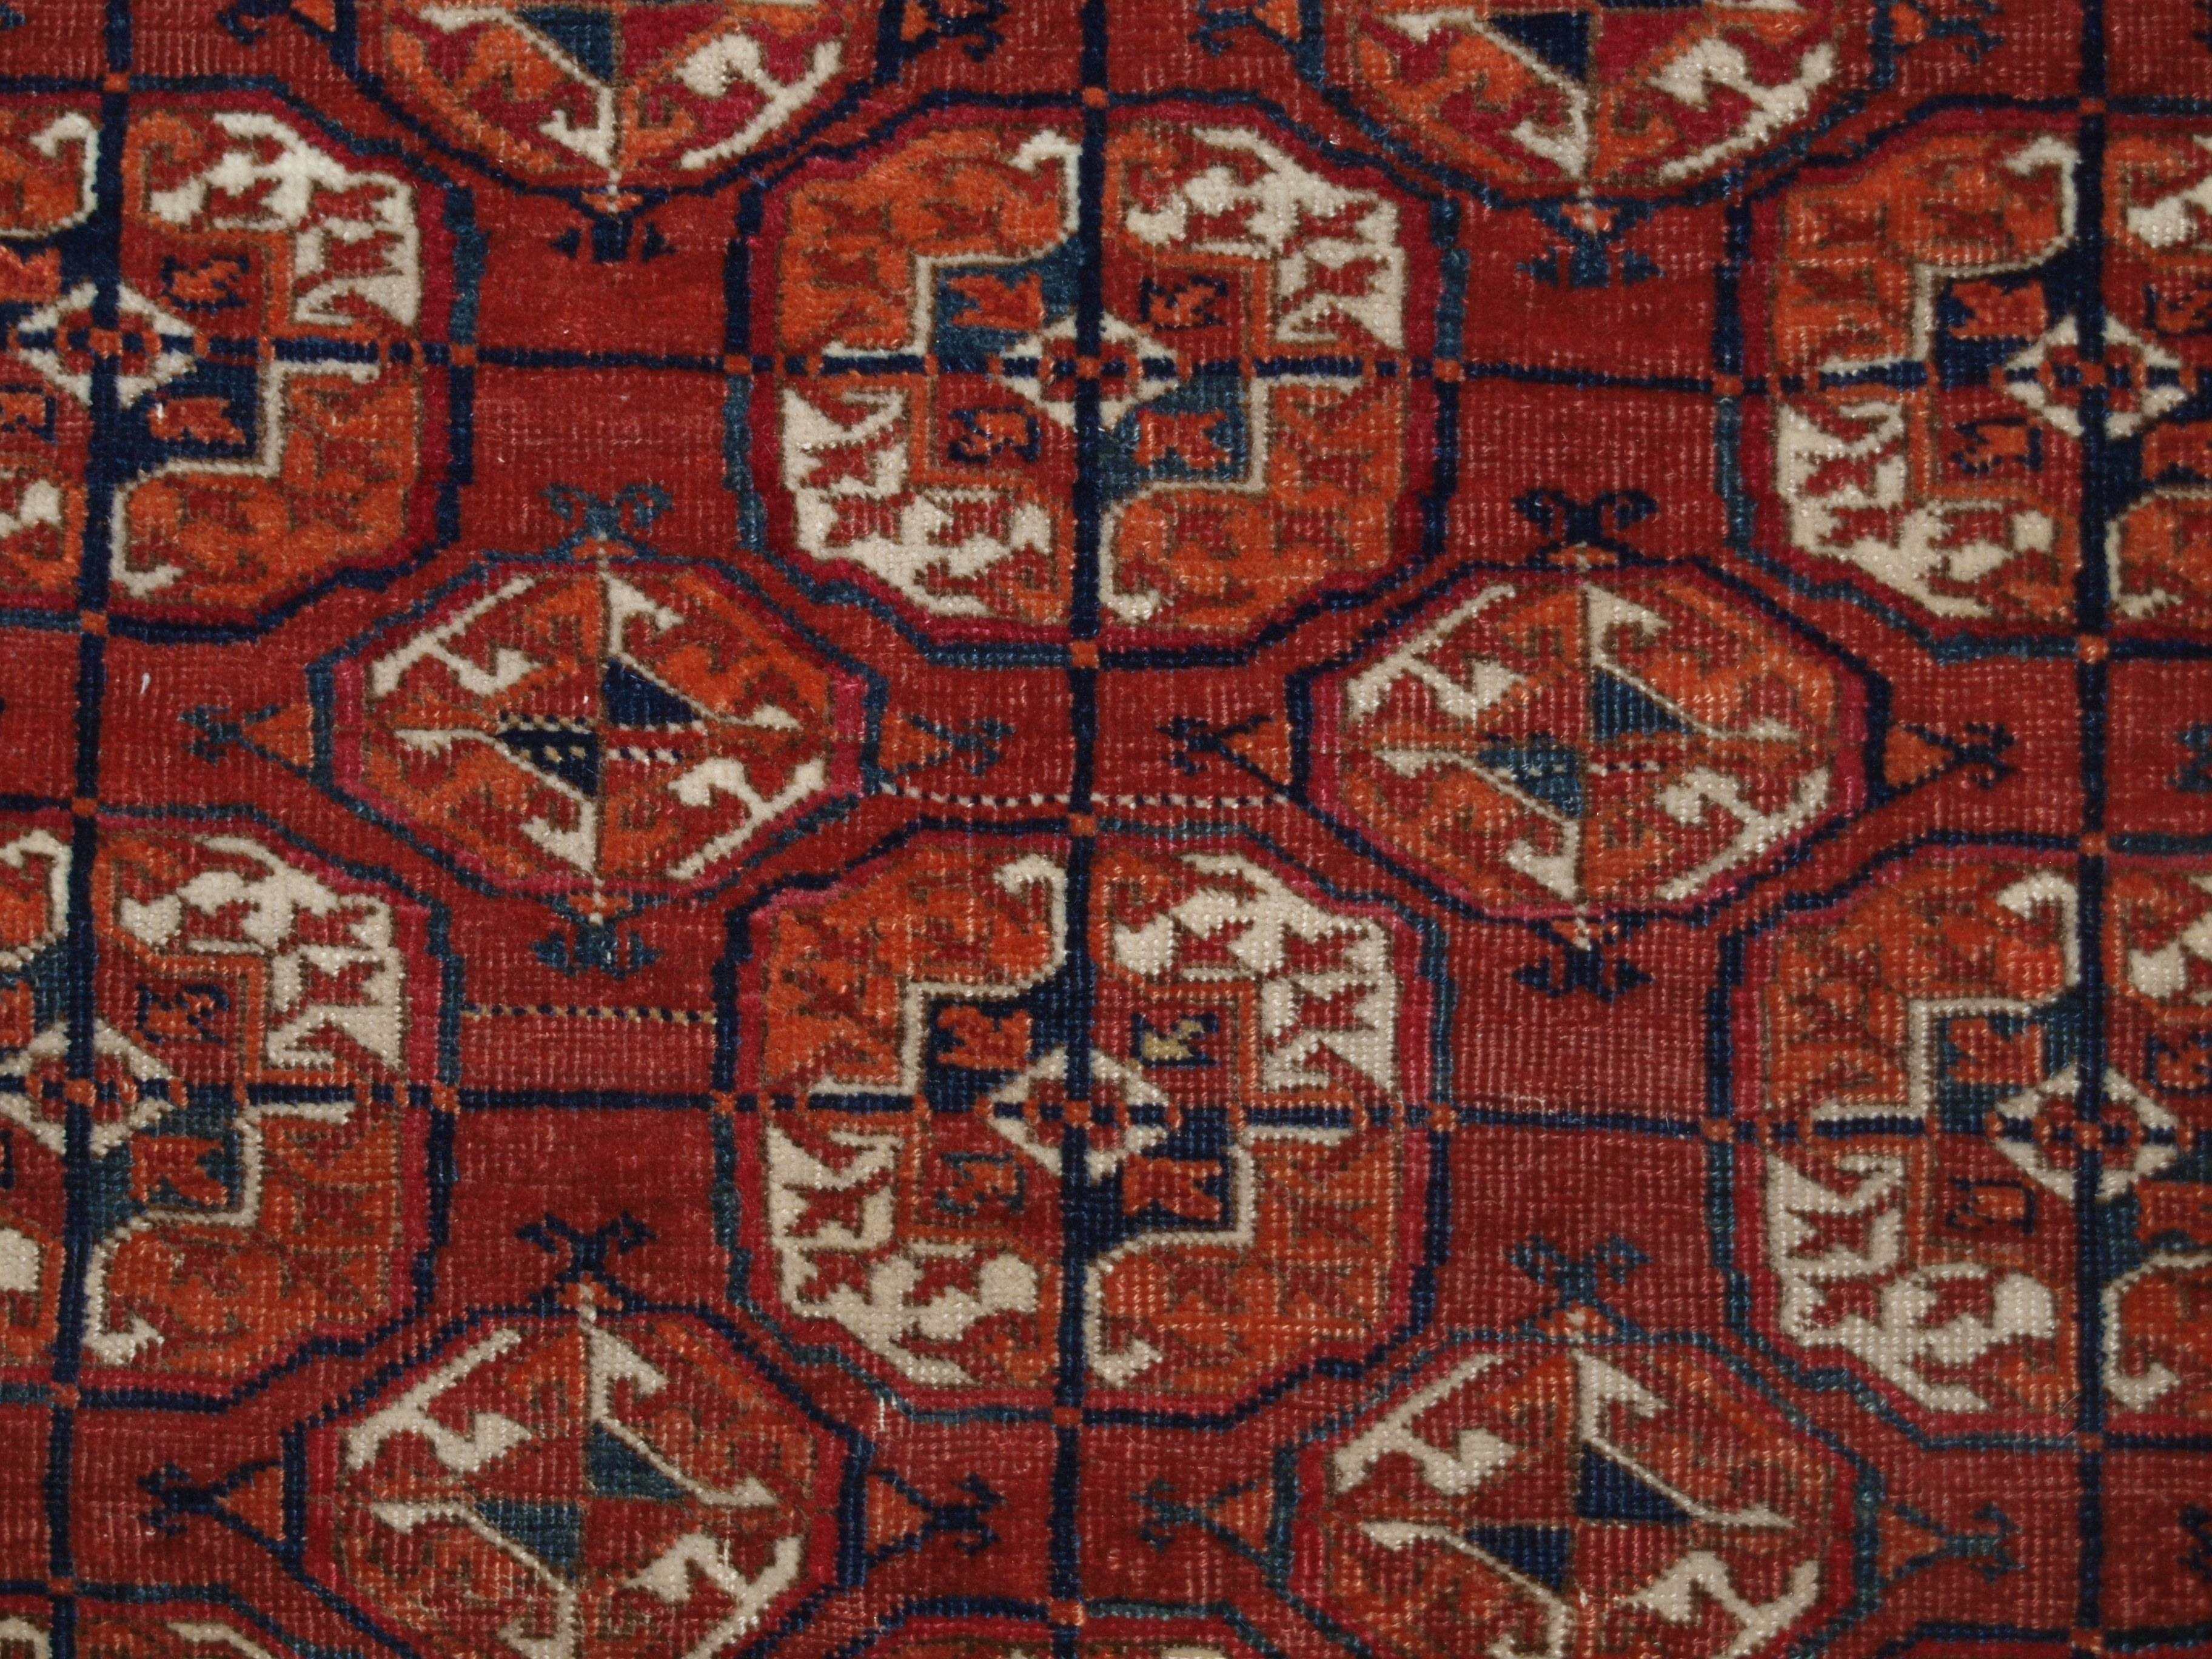 Antique Tekke Turkmen rug, excellent condition, good size and color, circa 1900.
Size: 7ft 1in x 4ft 0in (217 x 123cm).

Antique Tekke Turkmen rug of excellent design and color, fine weave and good size; the rug is of a soft red color. 

circa